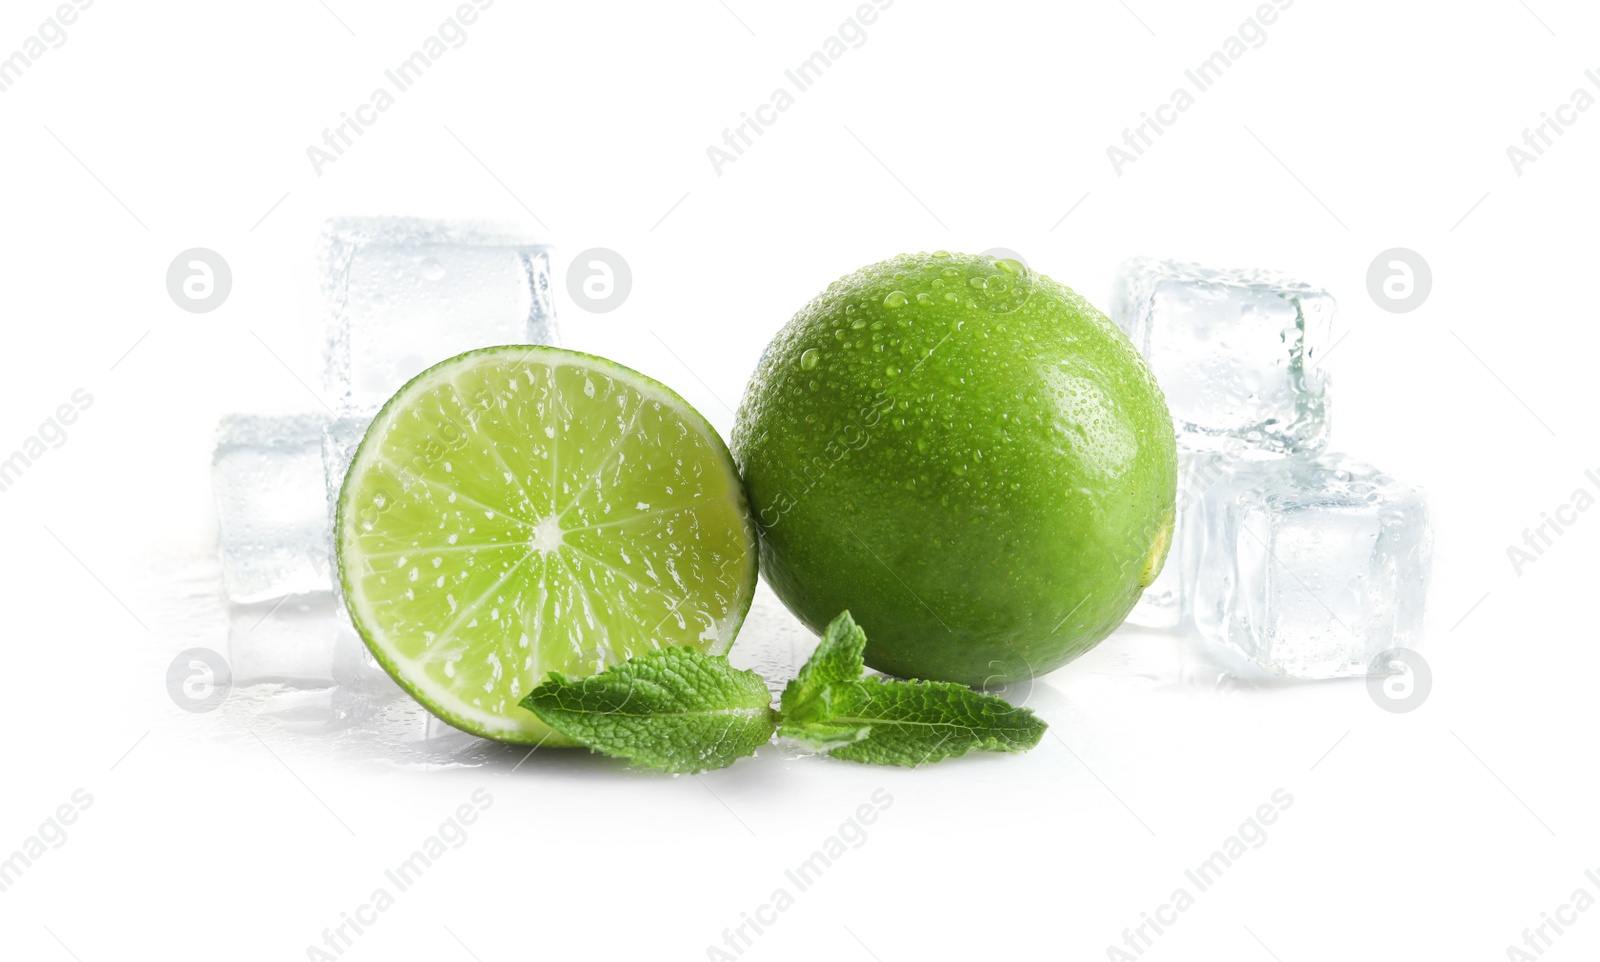 Photo of Fresh ripe limes and ice cubes on white background